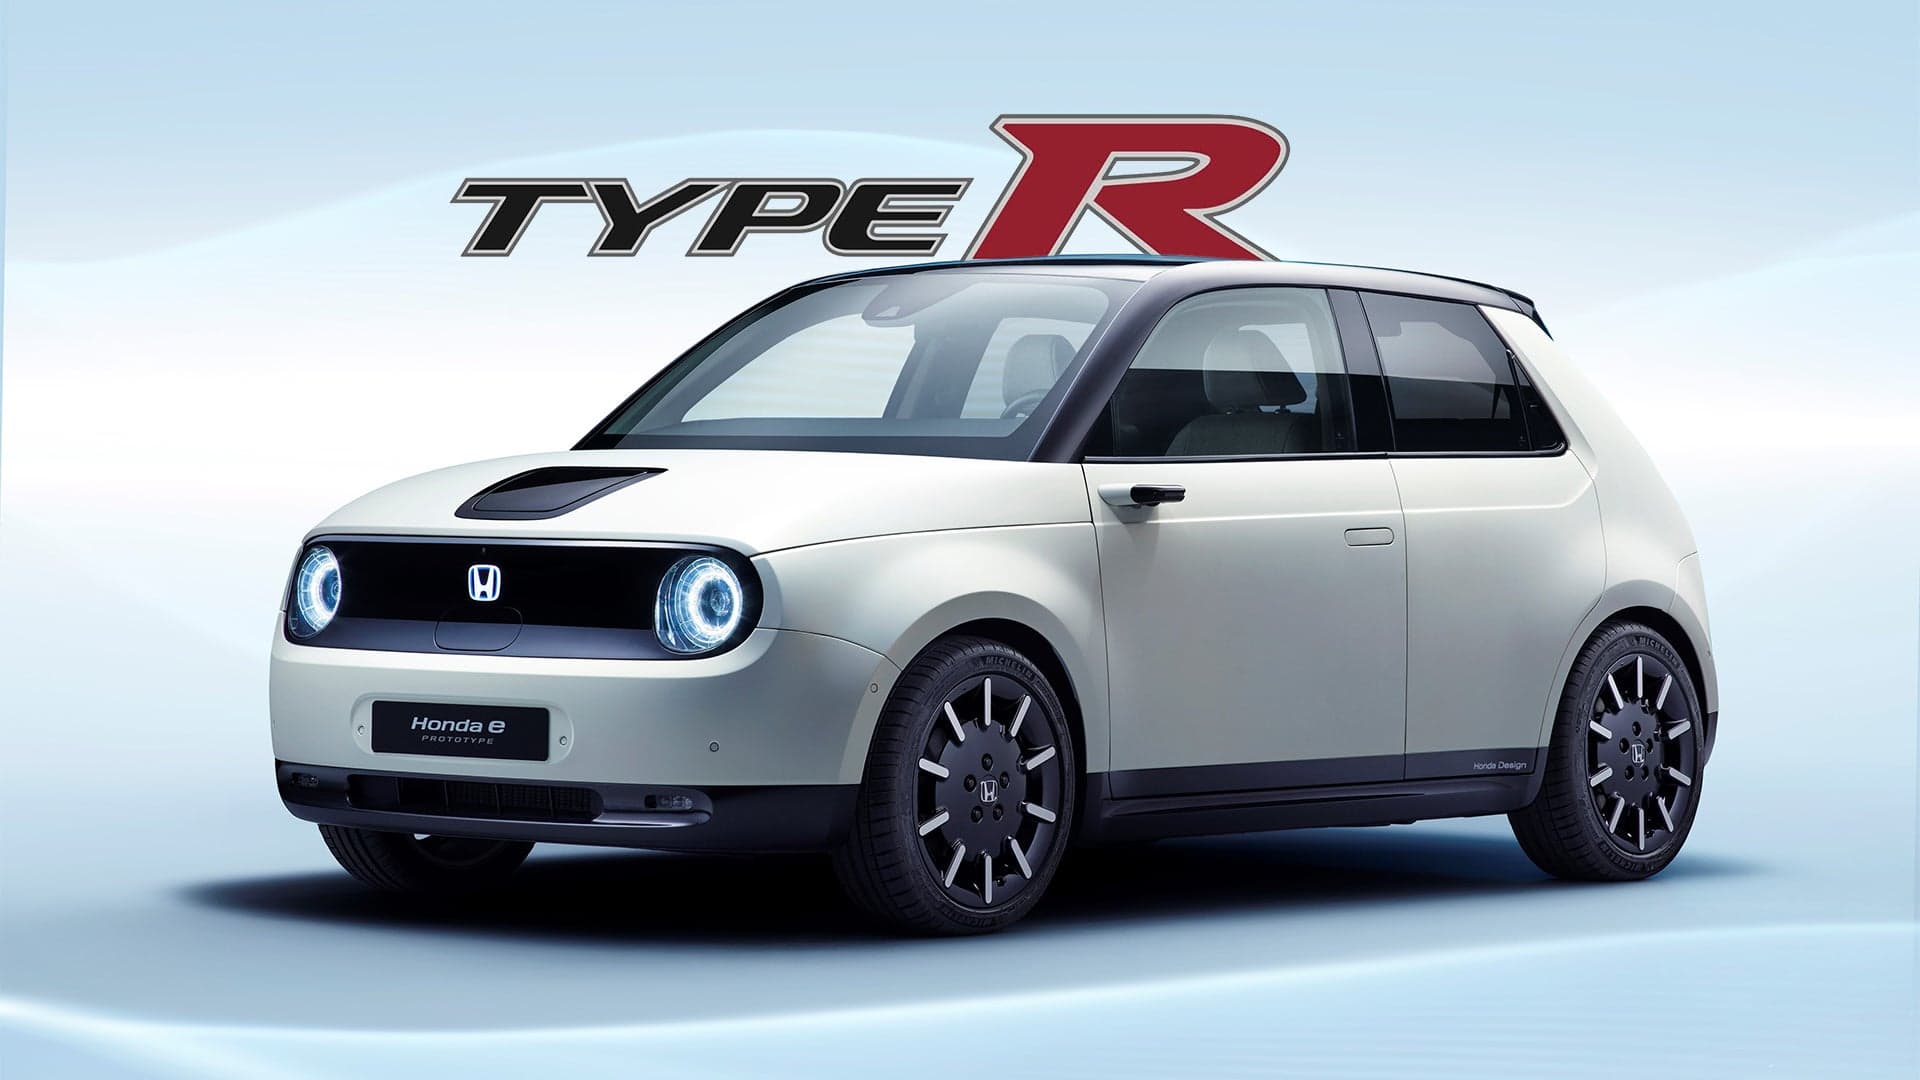 Adorable Honda E EV Could Get Type R-Like Hot Hatch Treatment: Report